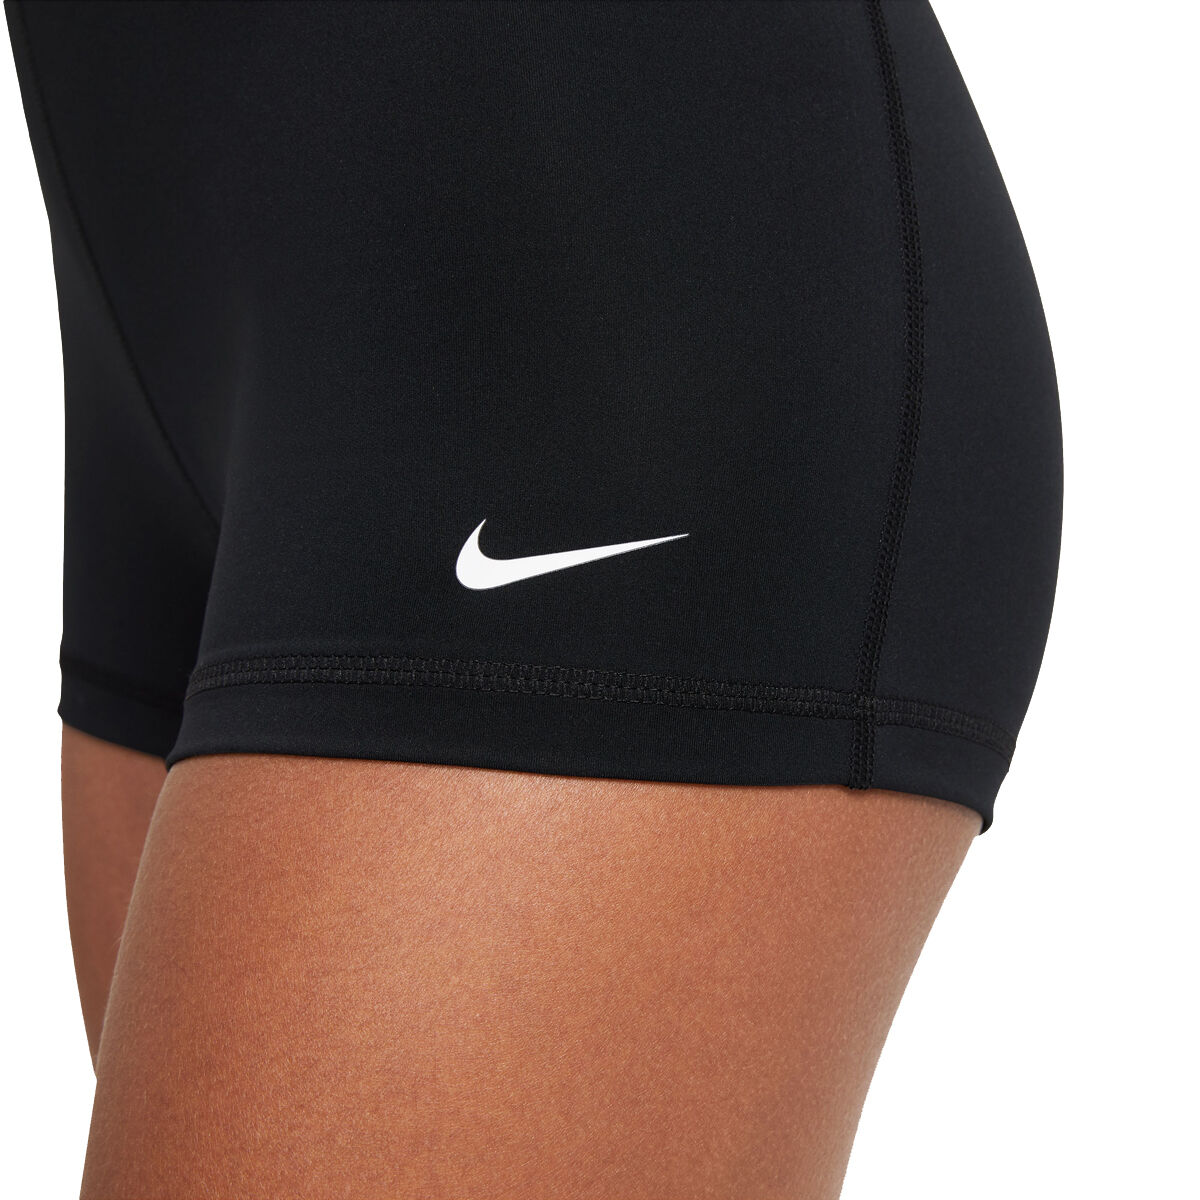 Nike Pro Tight Fit Women's Training Gym Running Casual Full Length